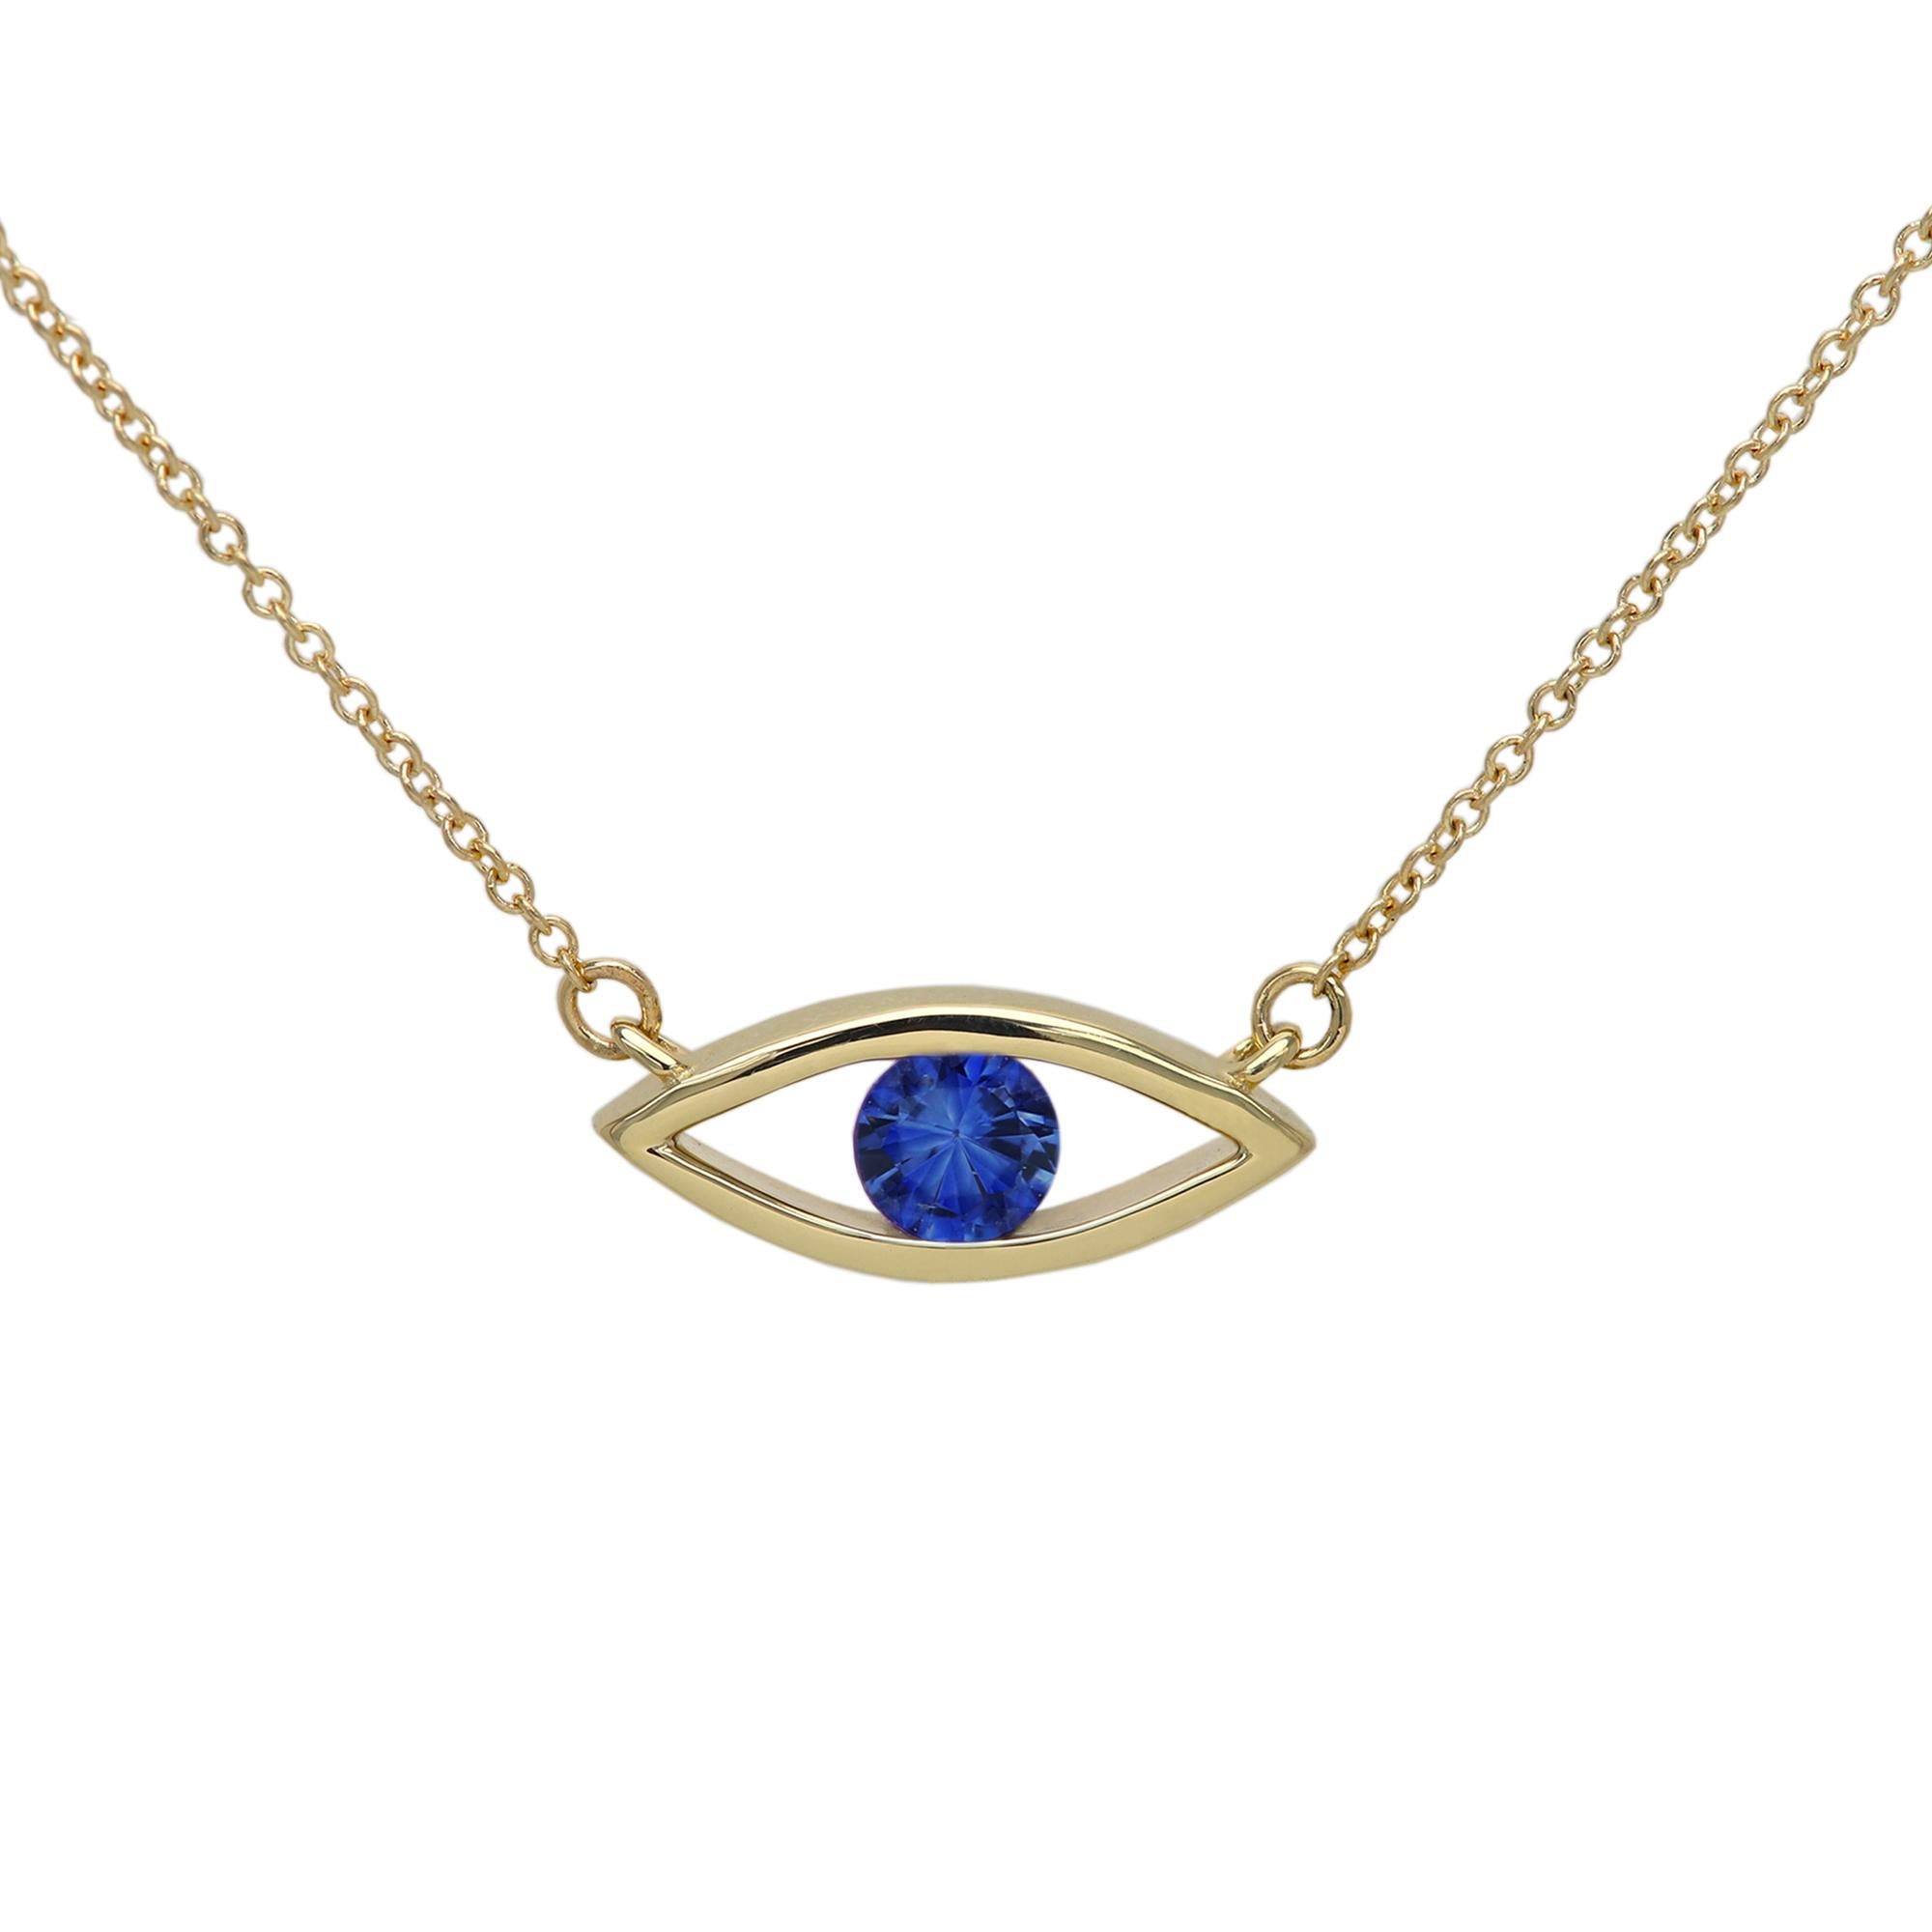 New, Very Elegant & Lovely Evil Eye Birthstone Necklace Solid 14k Yellow Gold with Natural Blue Sapphire gemstone 
Set in Yellow Gold Evil Eye - Good Luck & protection Necklace
Classic Cable Chain and Lobster Lock - all 14k, 
Chain Length - as your